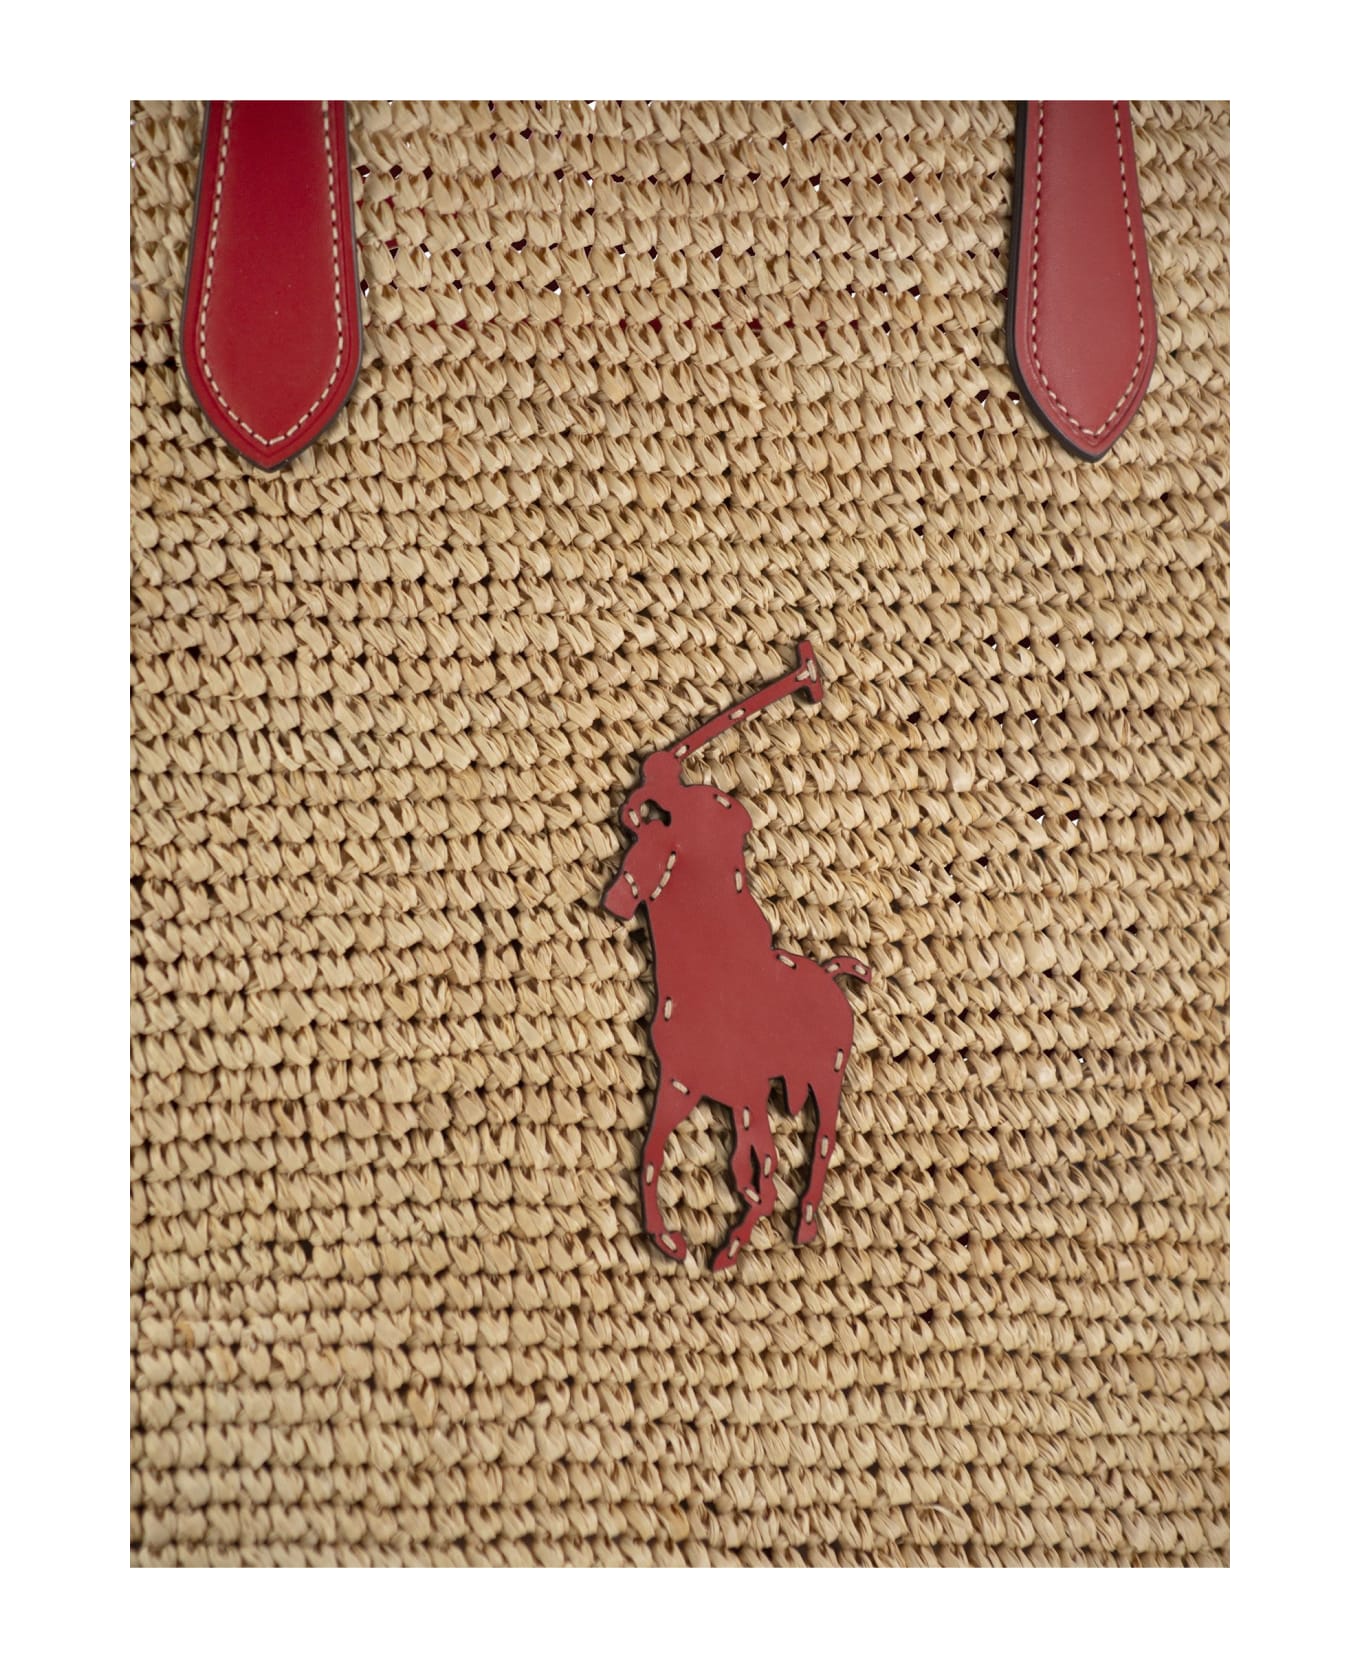 Polo Ralph Lauren Big Pony Canvas Tote - Red/natural